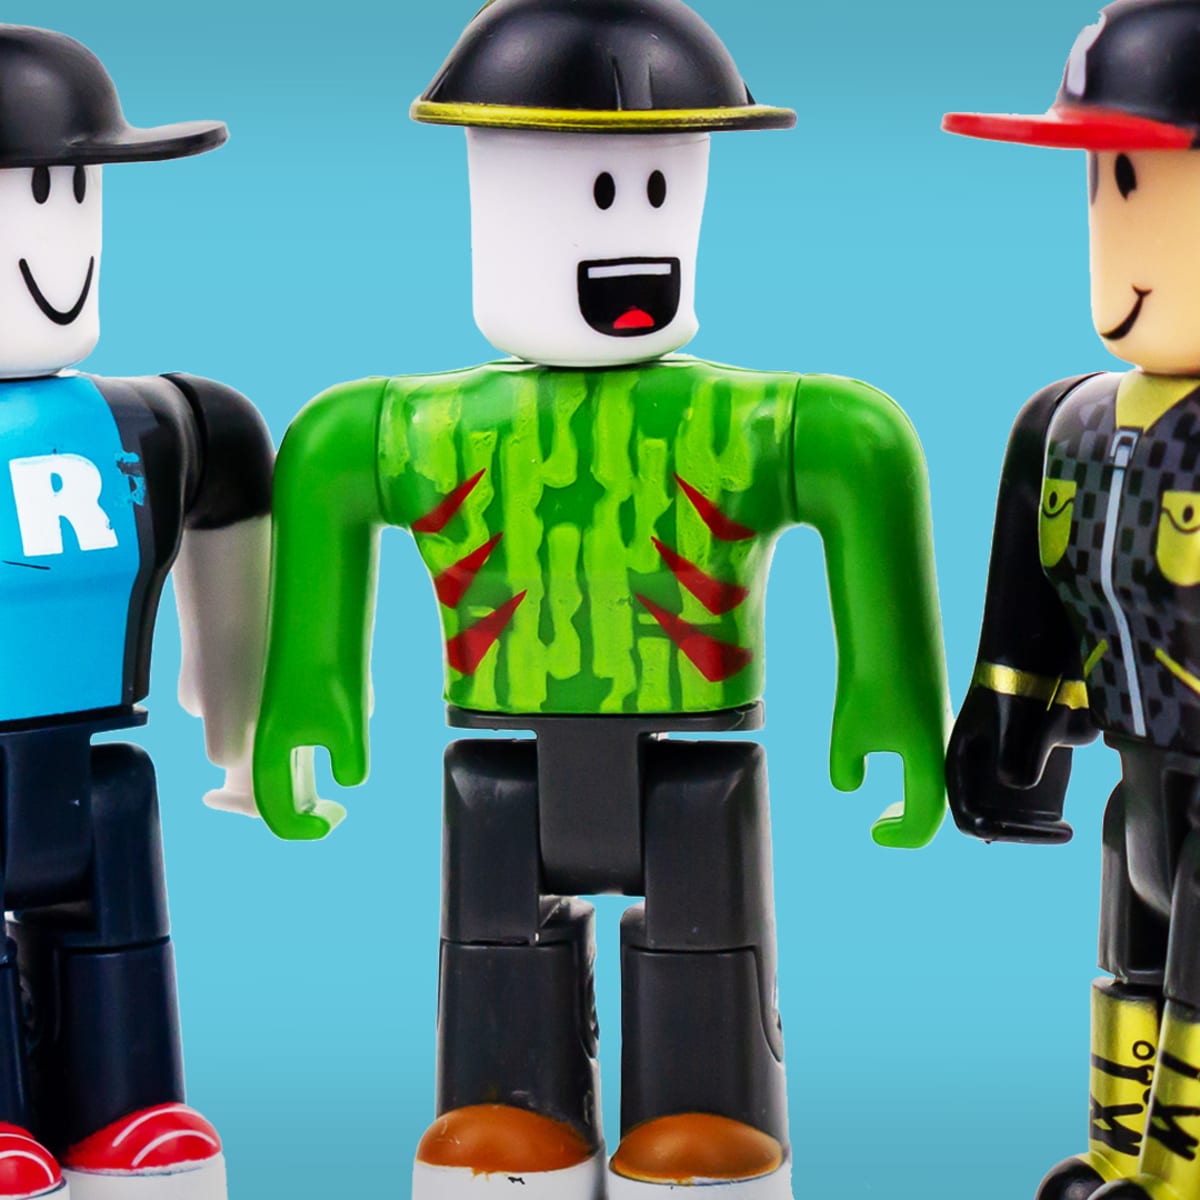 Roblox Drops As Usage Rates Decline But Analysts Hold Ratings Thestreet - roblox com pr